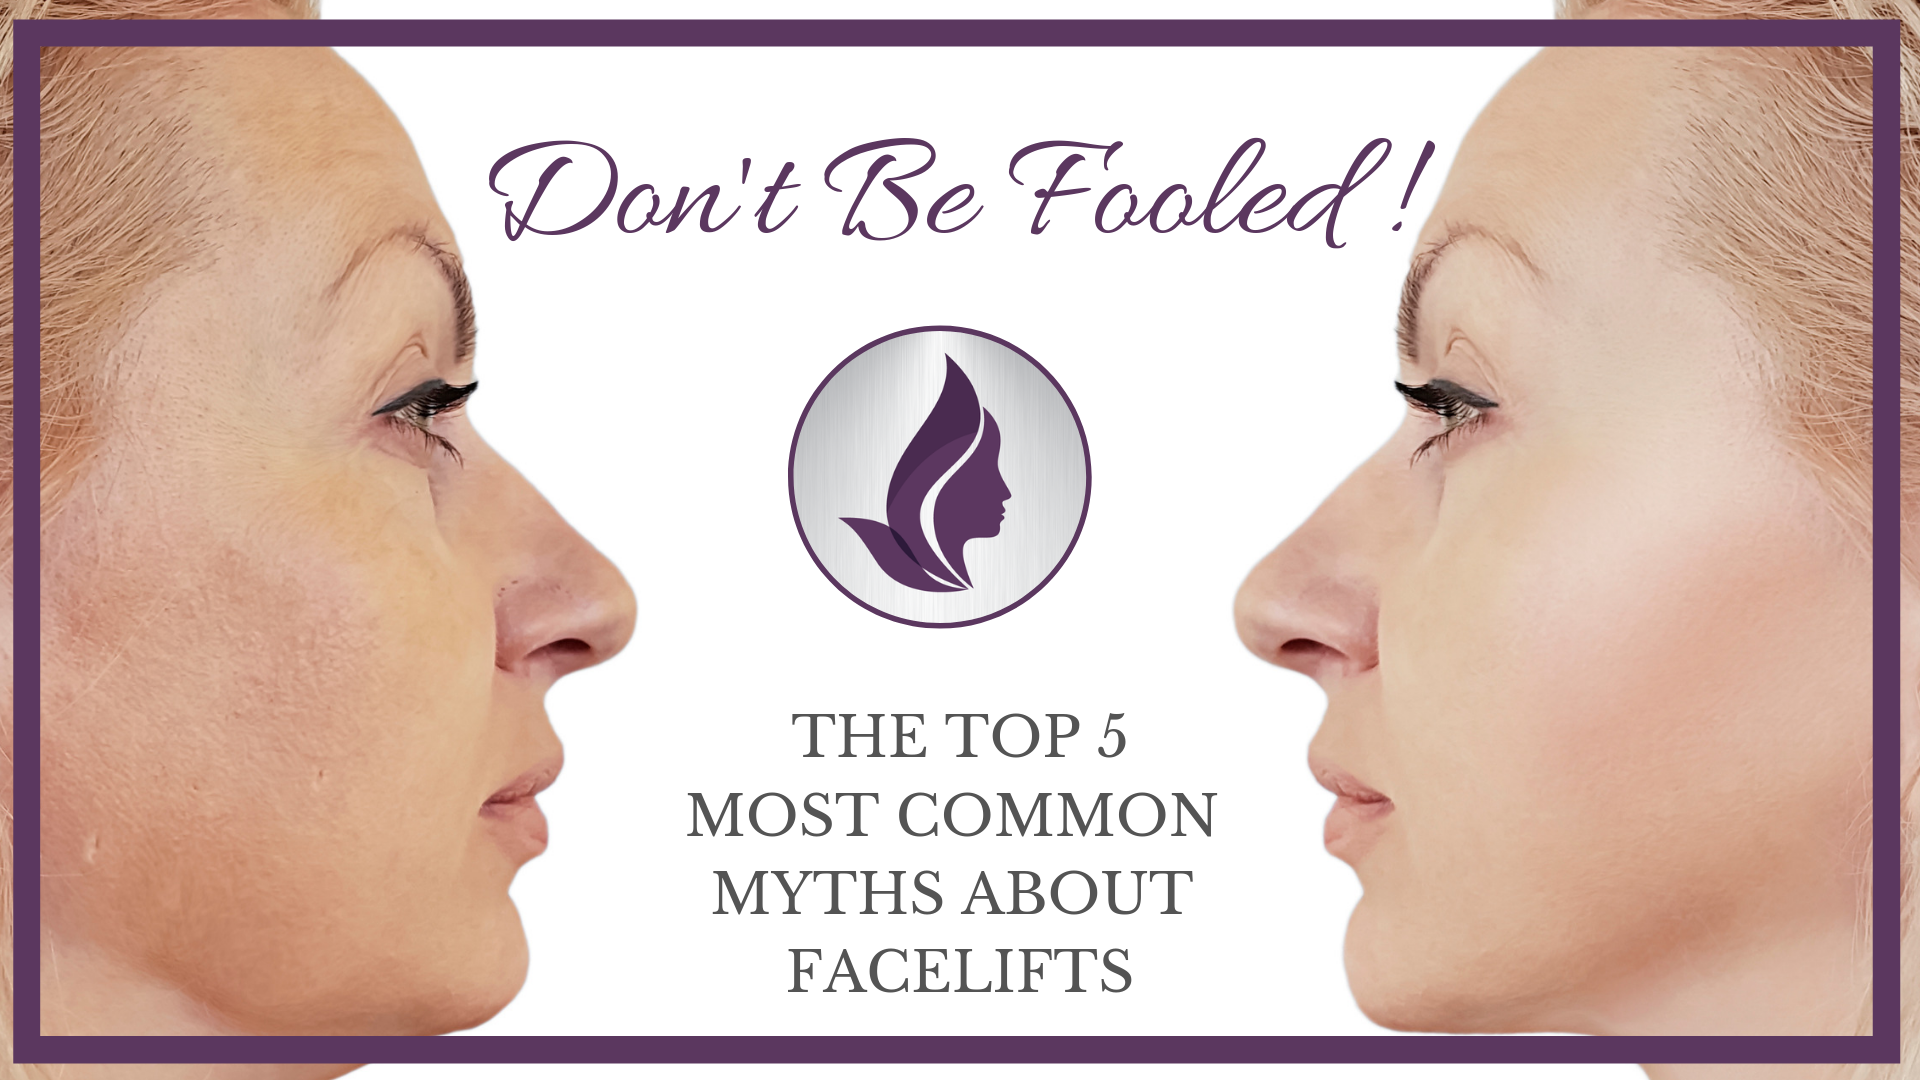 Myths about Facelifts